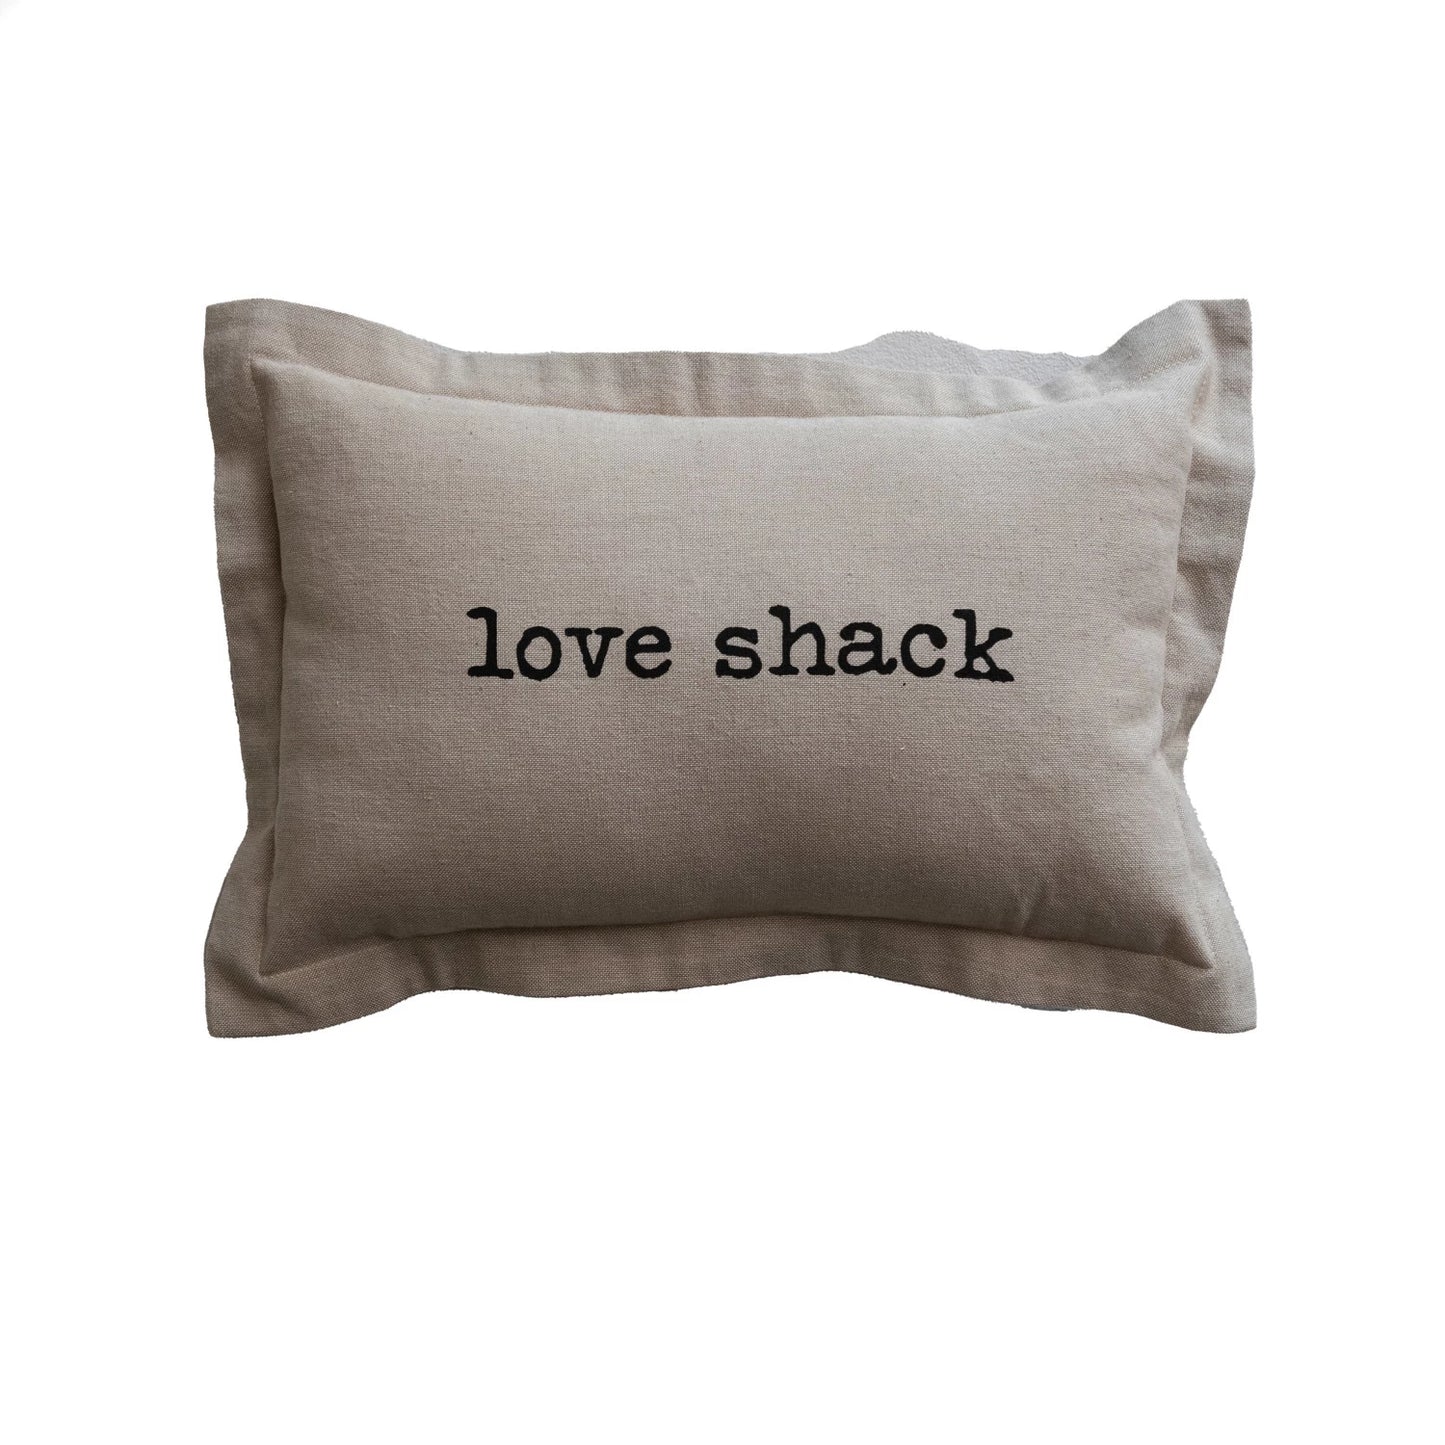 Chambray Printed Lumbar Pillow by Creative Co-Op in Beige